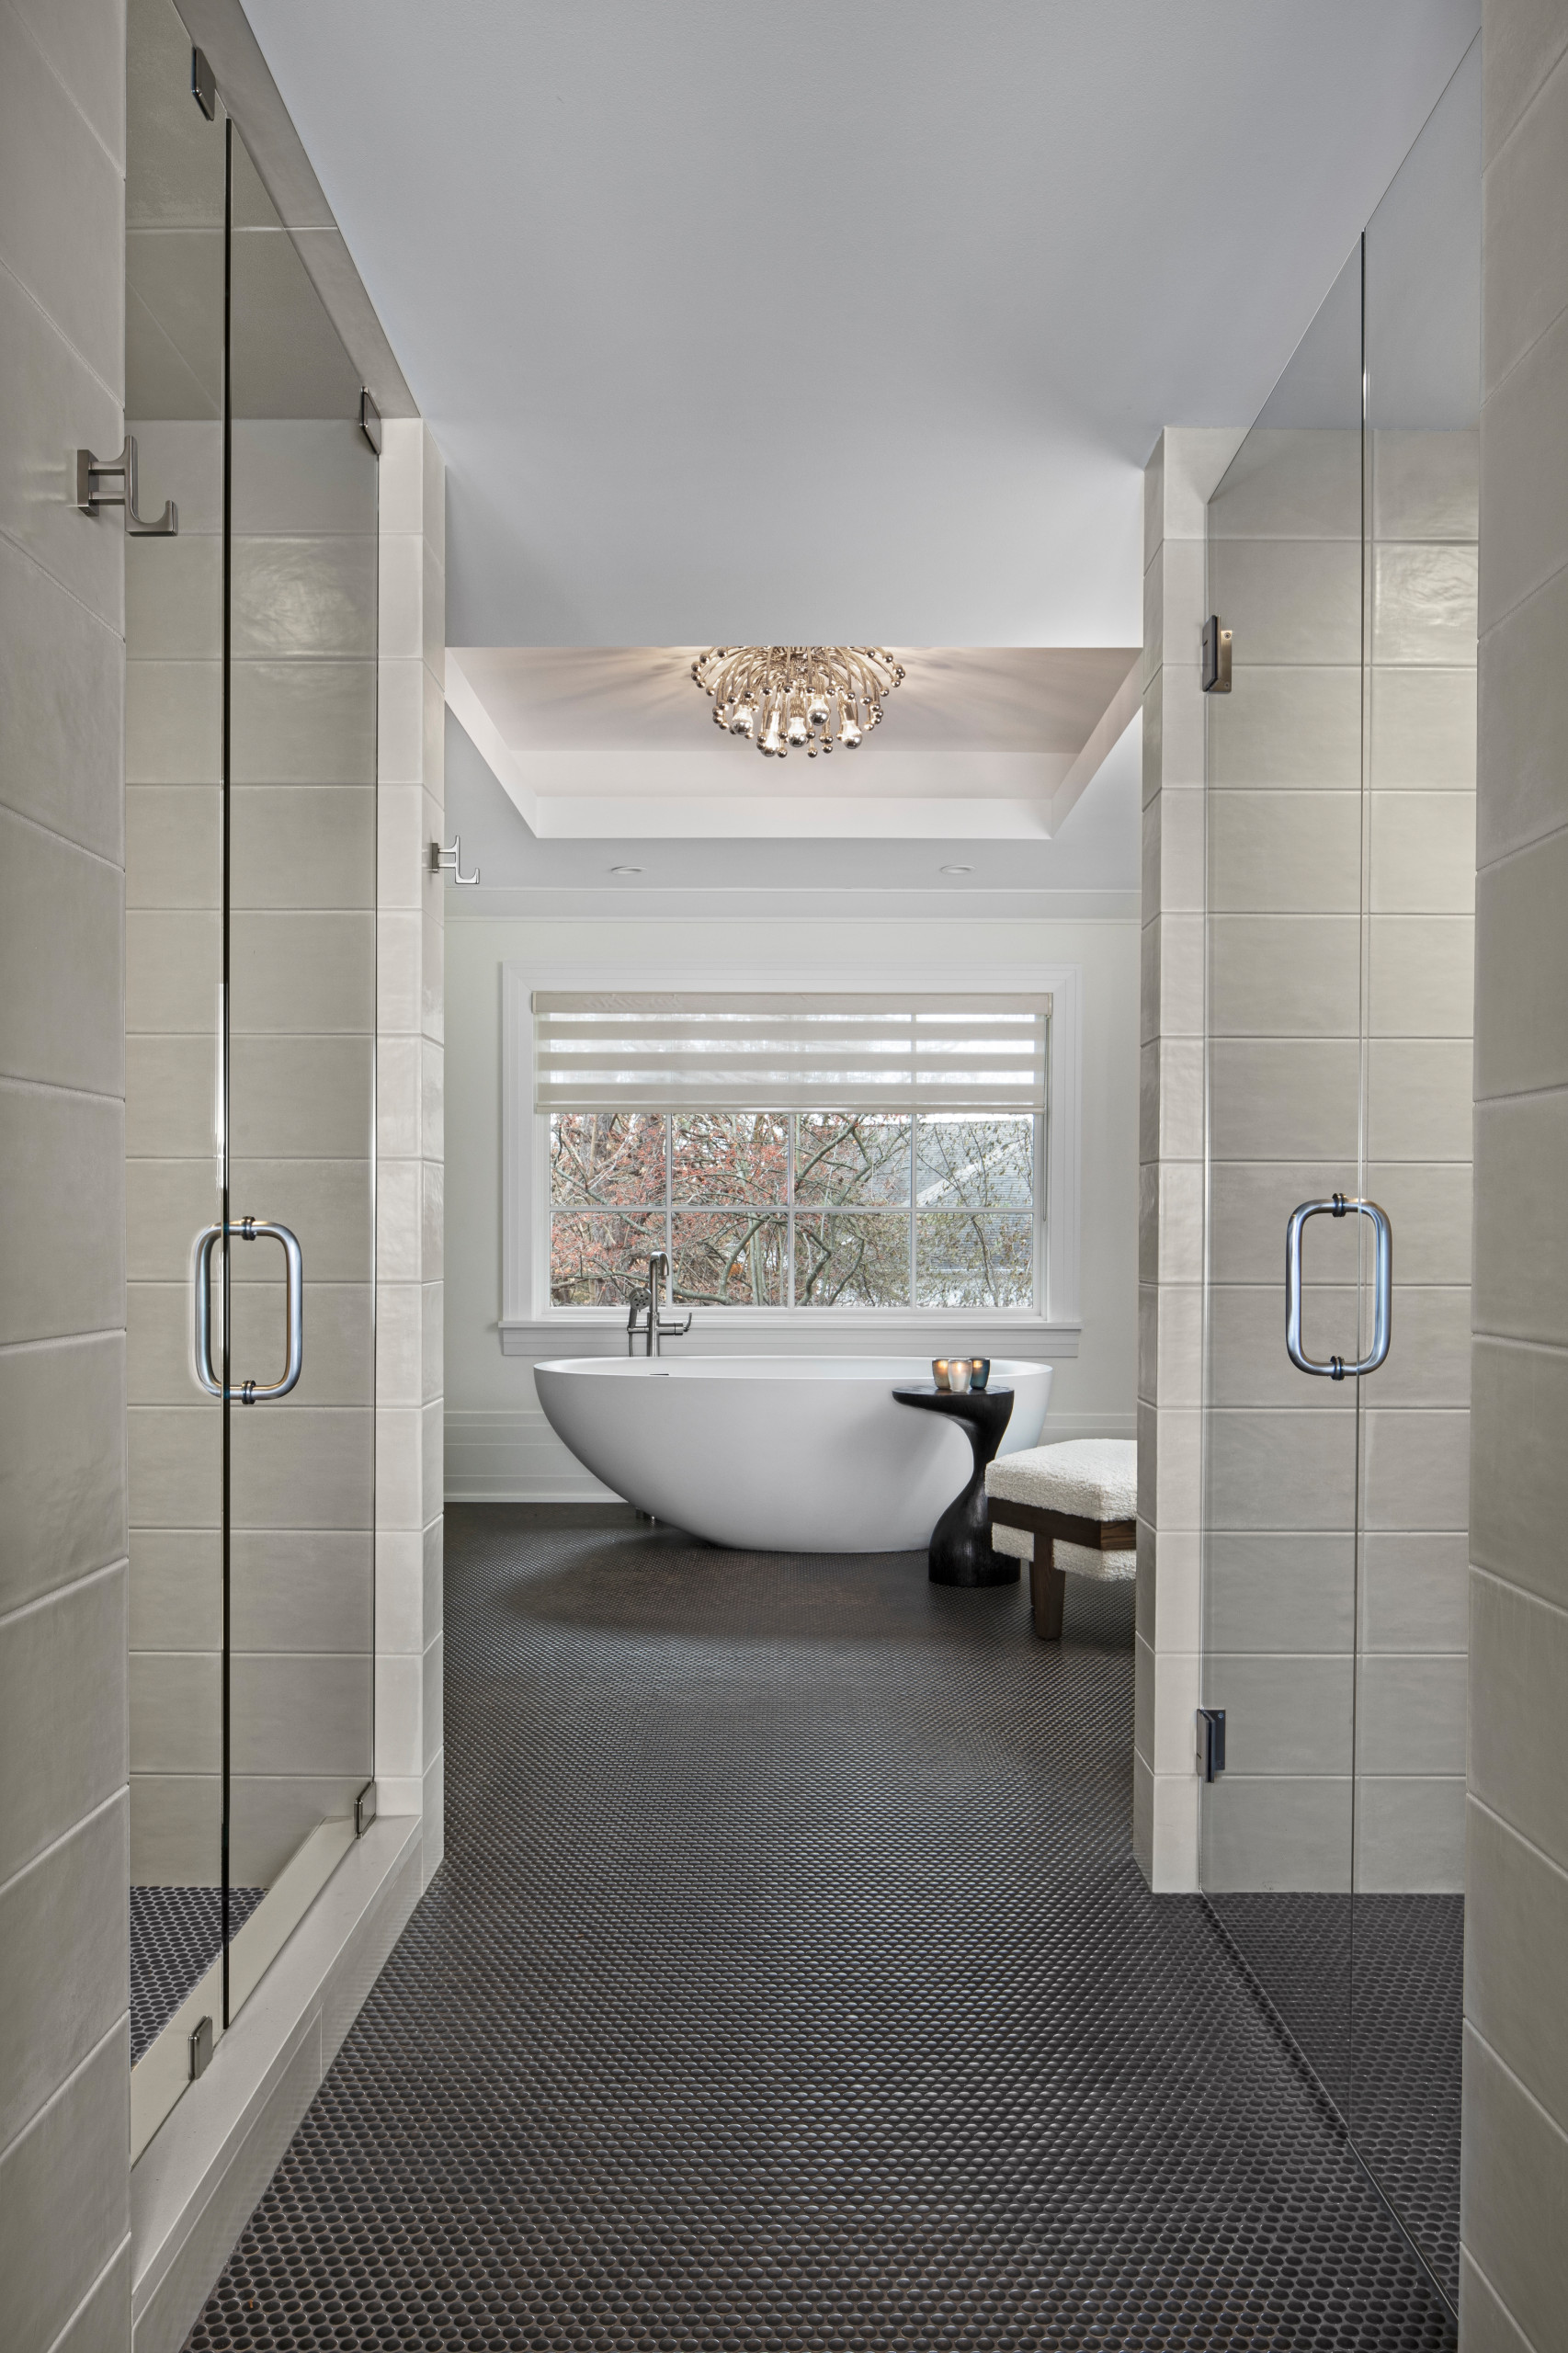 The experience of entering the master bath for Her is one filled with elegance and drama. The copper penny round tile floor leads past a pair of Euro Glass doors, with a shower room to the left and a